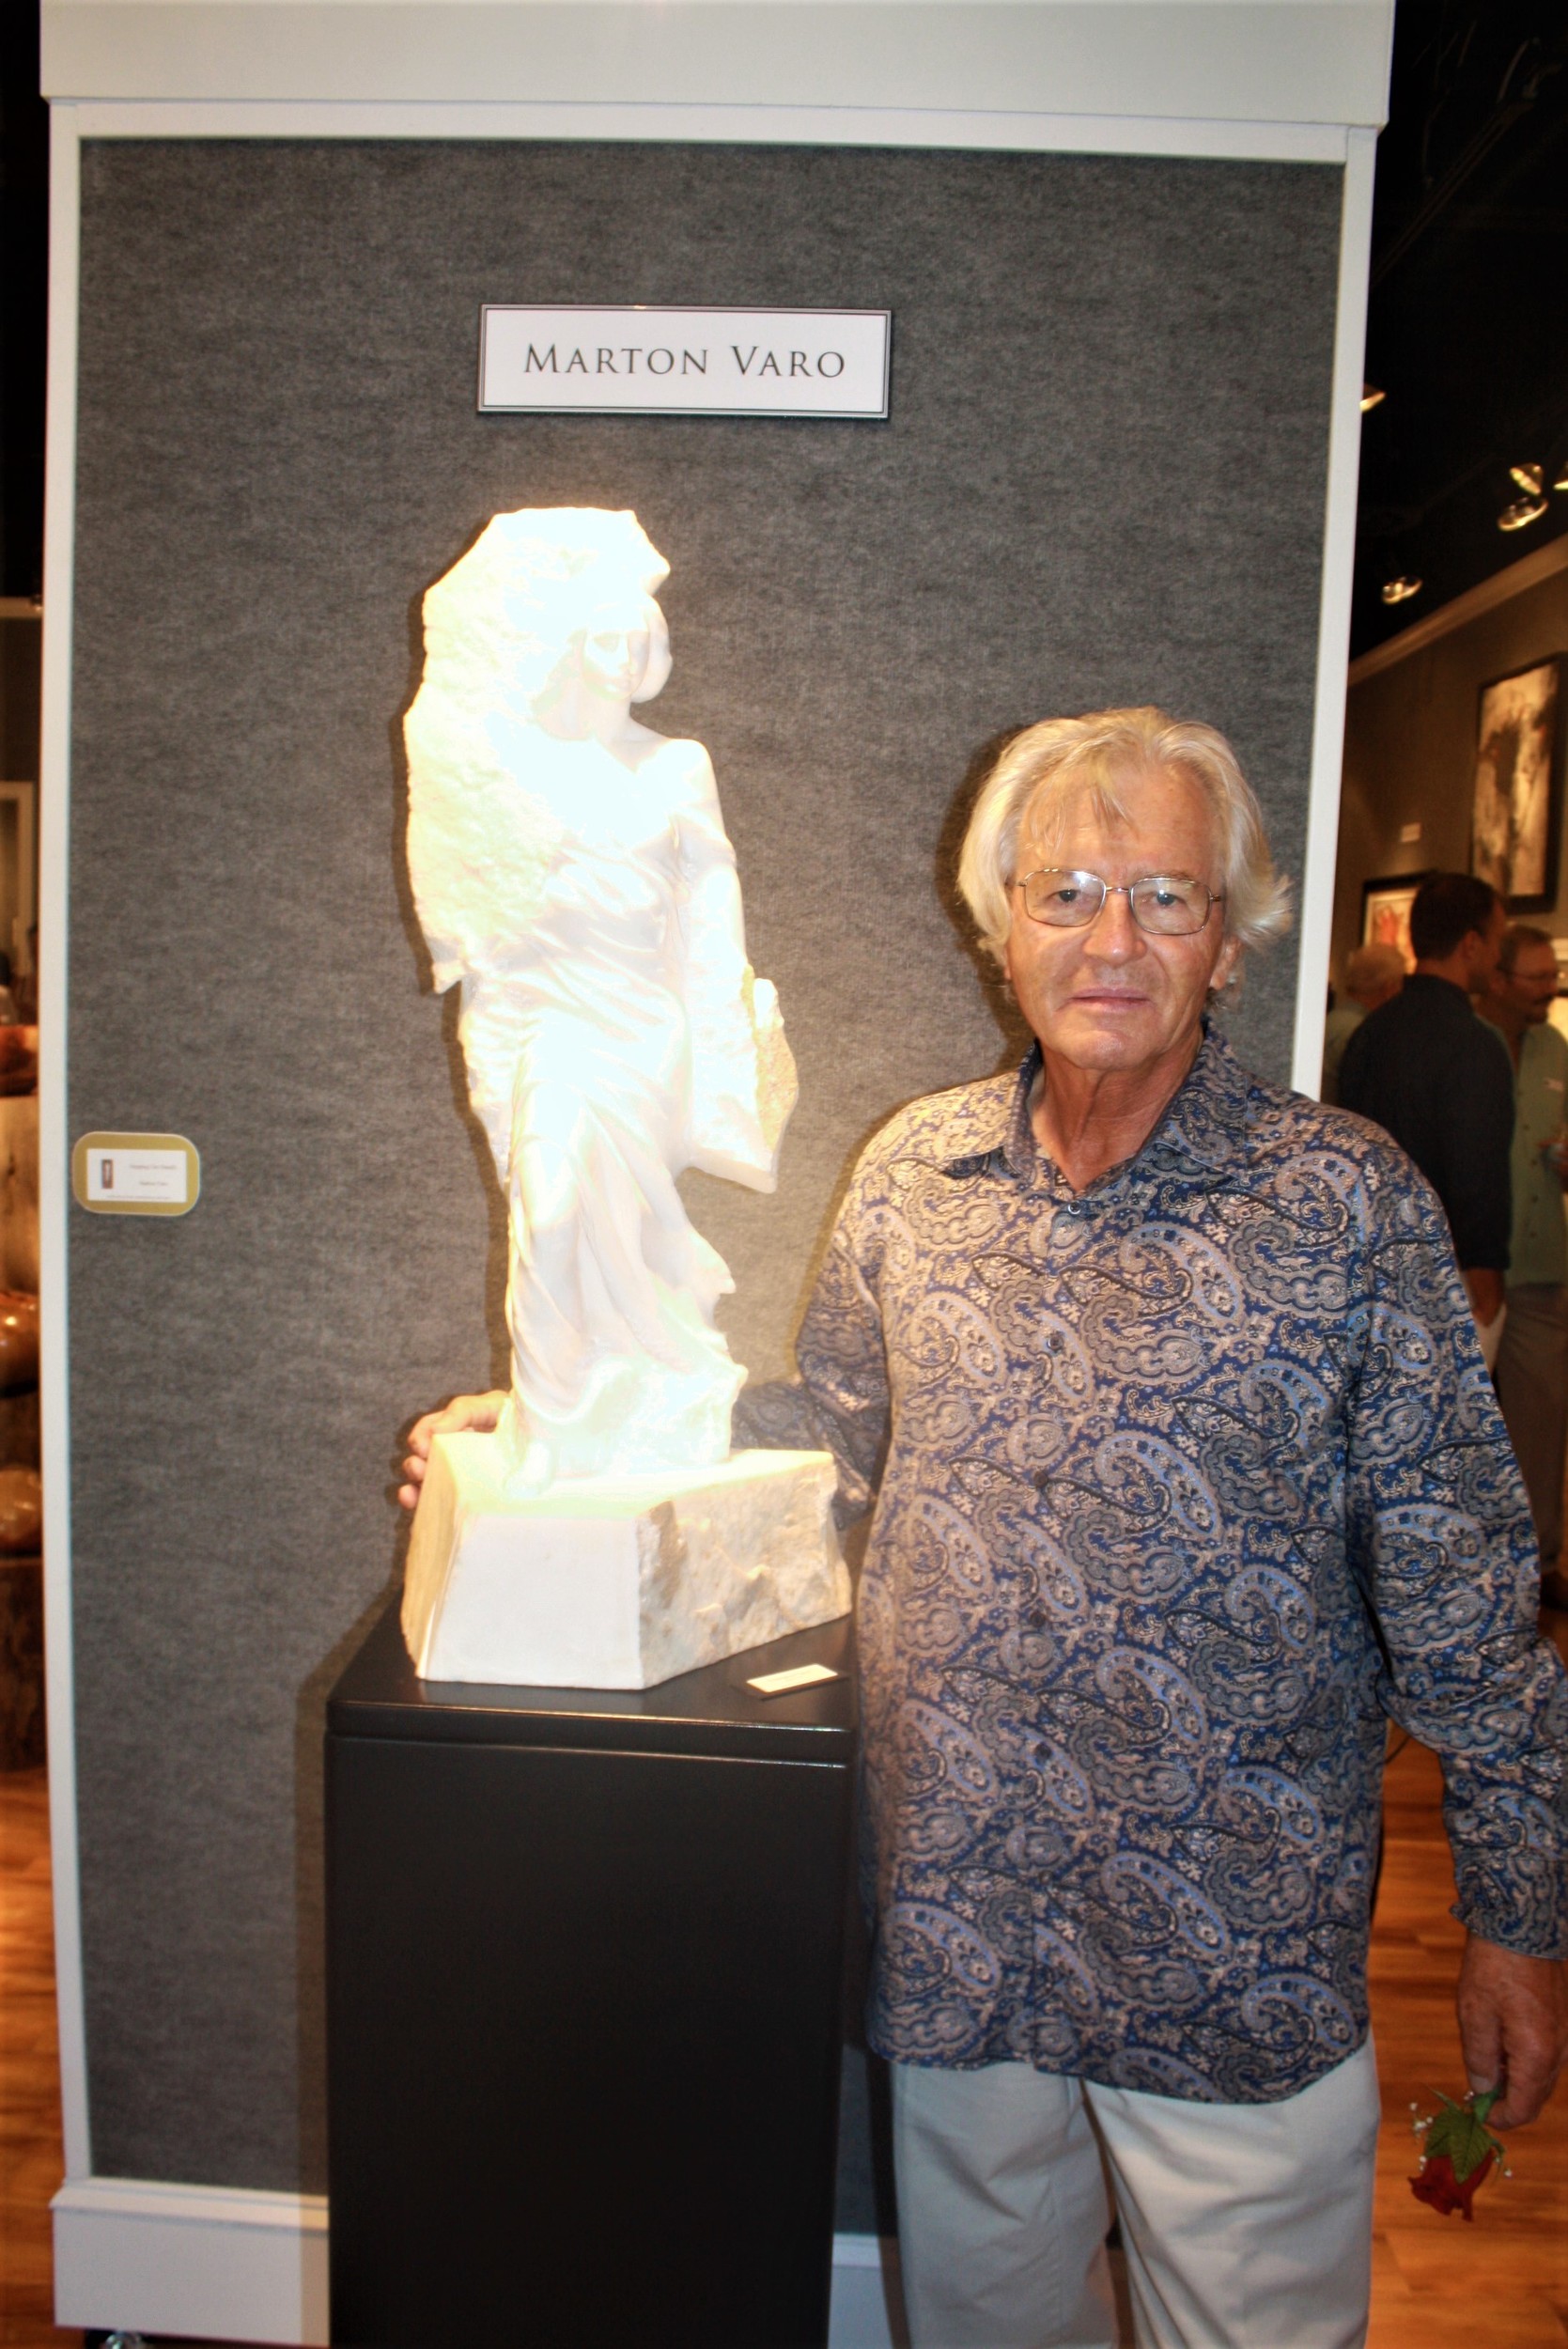 Sculptor Marton Varo displays one of his works at Cutter & Cutter